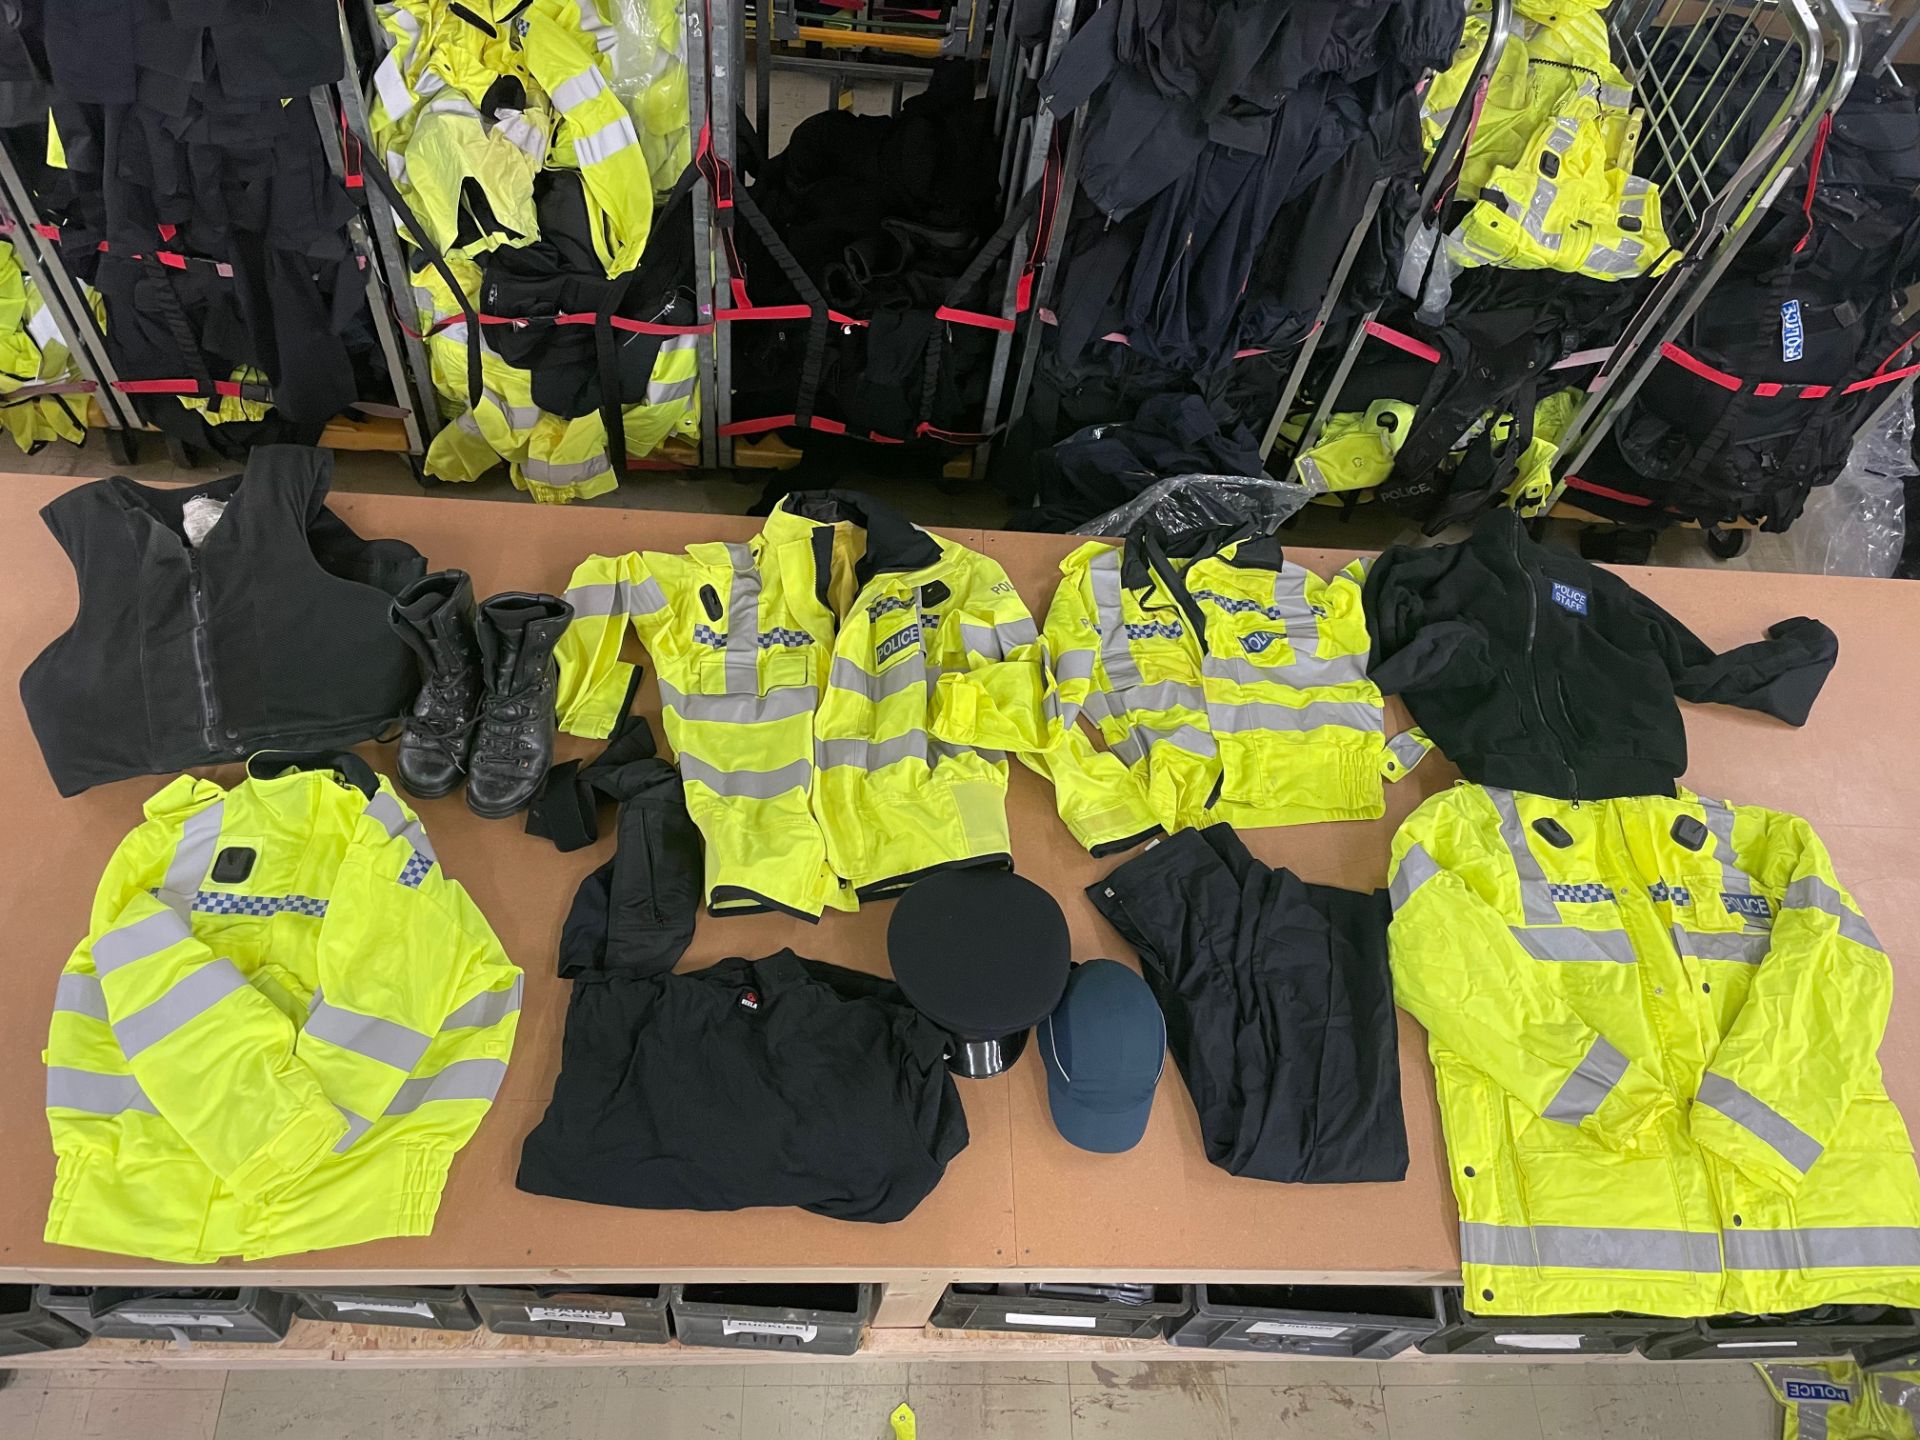 10 X BAGS OF EX POLICE CLOTHING - RRP £2750.00 - Image 7 of 12